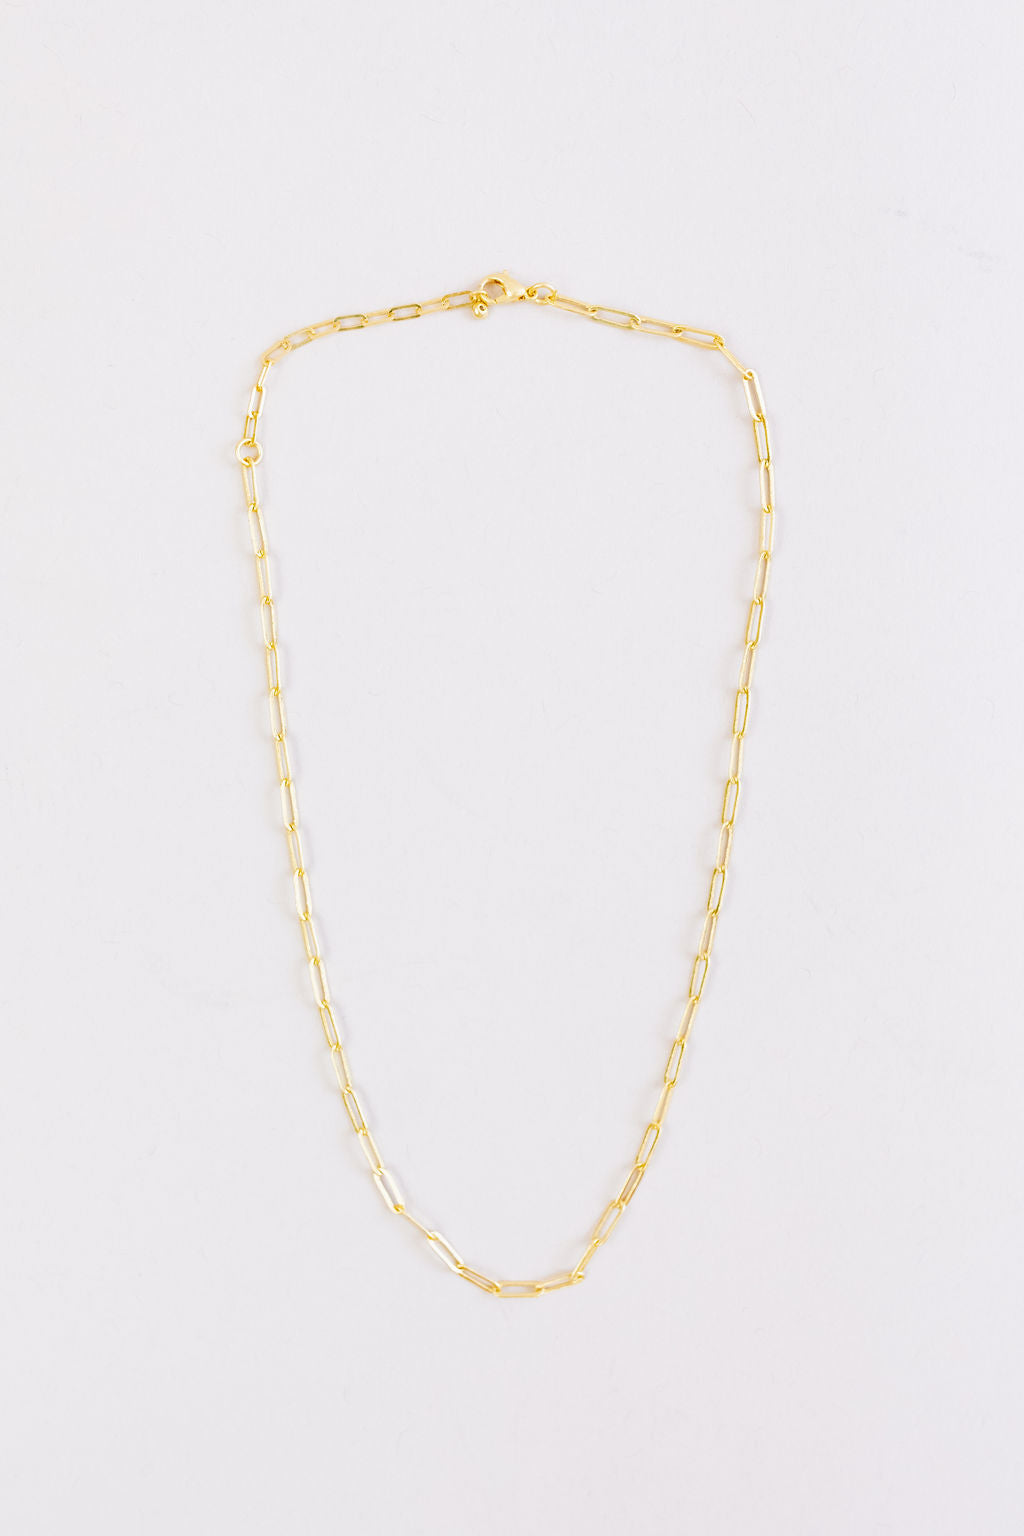 Stacked To Perfection Paperclip Chain Necklace - Poppy and Stella